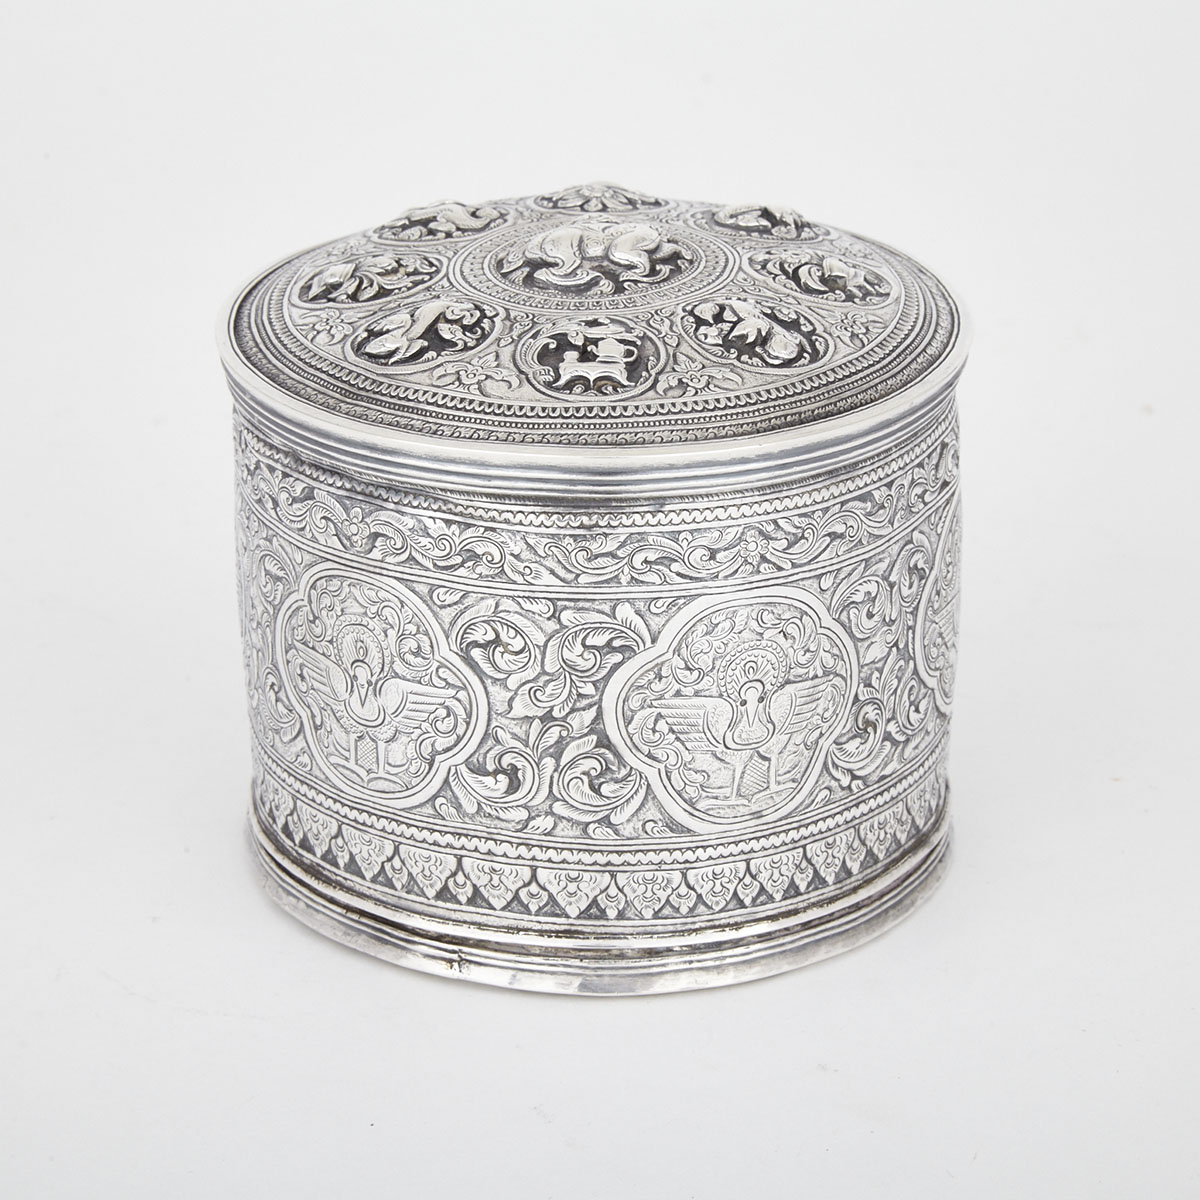 Eastern Silver Canister, probably Burmese, late 19th century